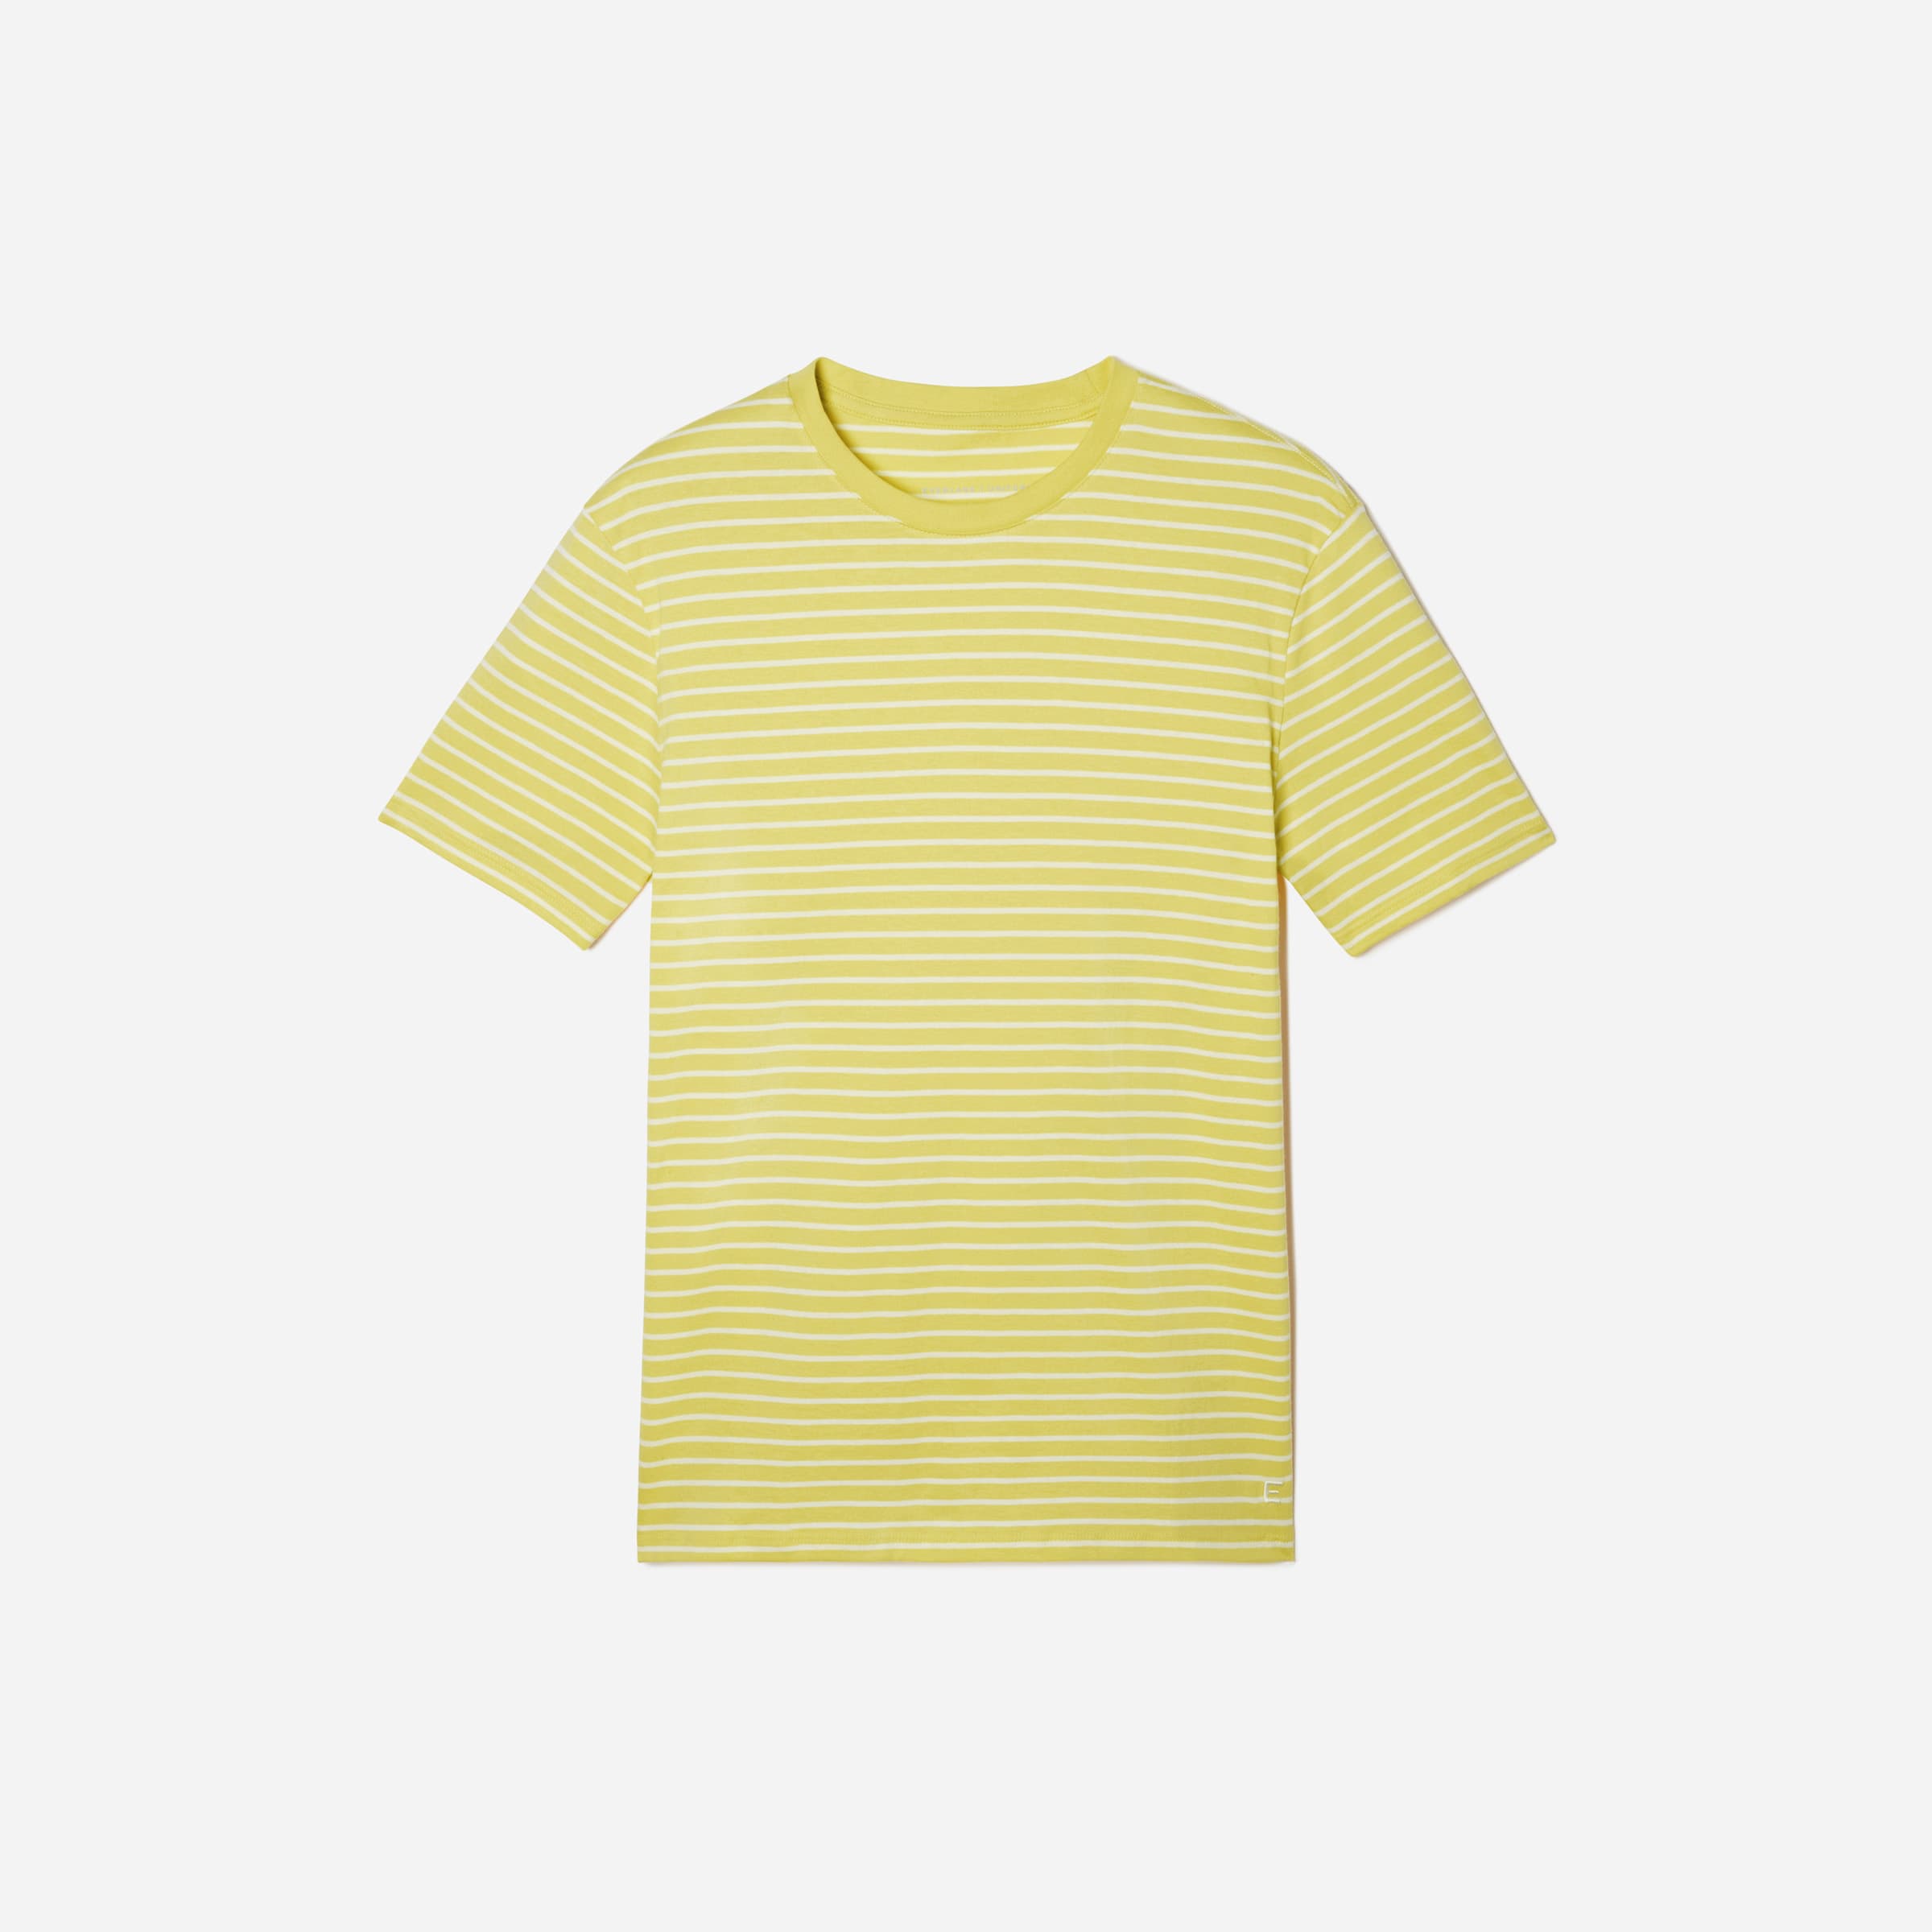  JIOEEH Sweatshirts for Men,Solid Color Tshirts Men,Olive Shirts  for Men,Clearance Items Under 1.00,Yellow Striped Shirt,Men t Shirts  Pack,Men's Yellow Summer Shirt : Clothing, Shoes & Jewelry